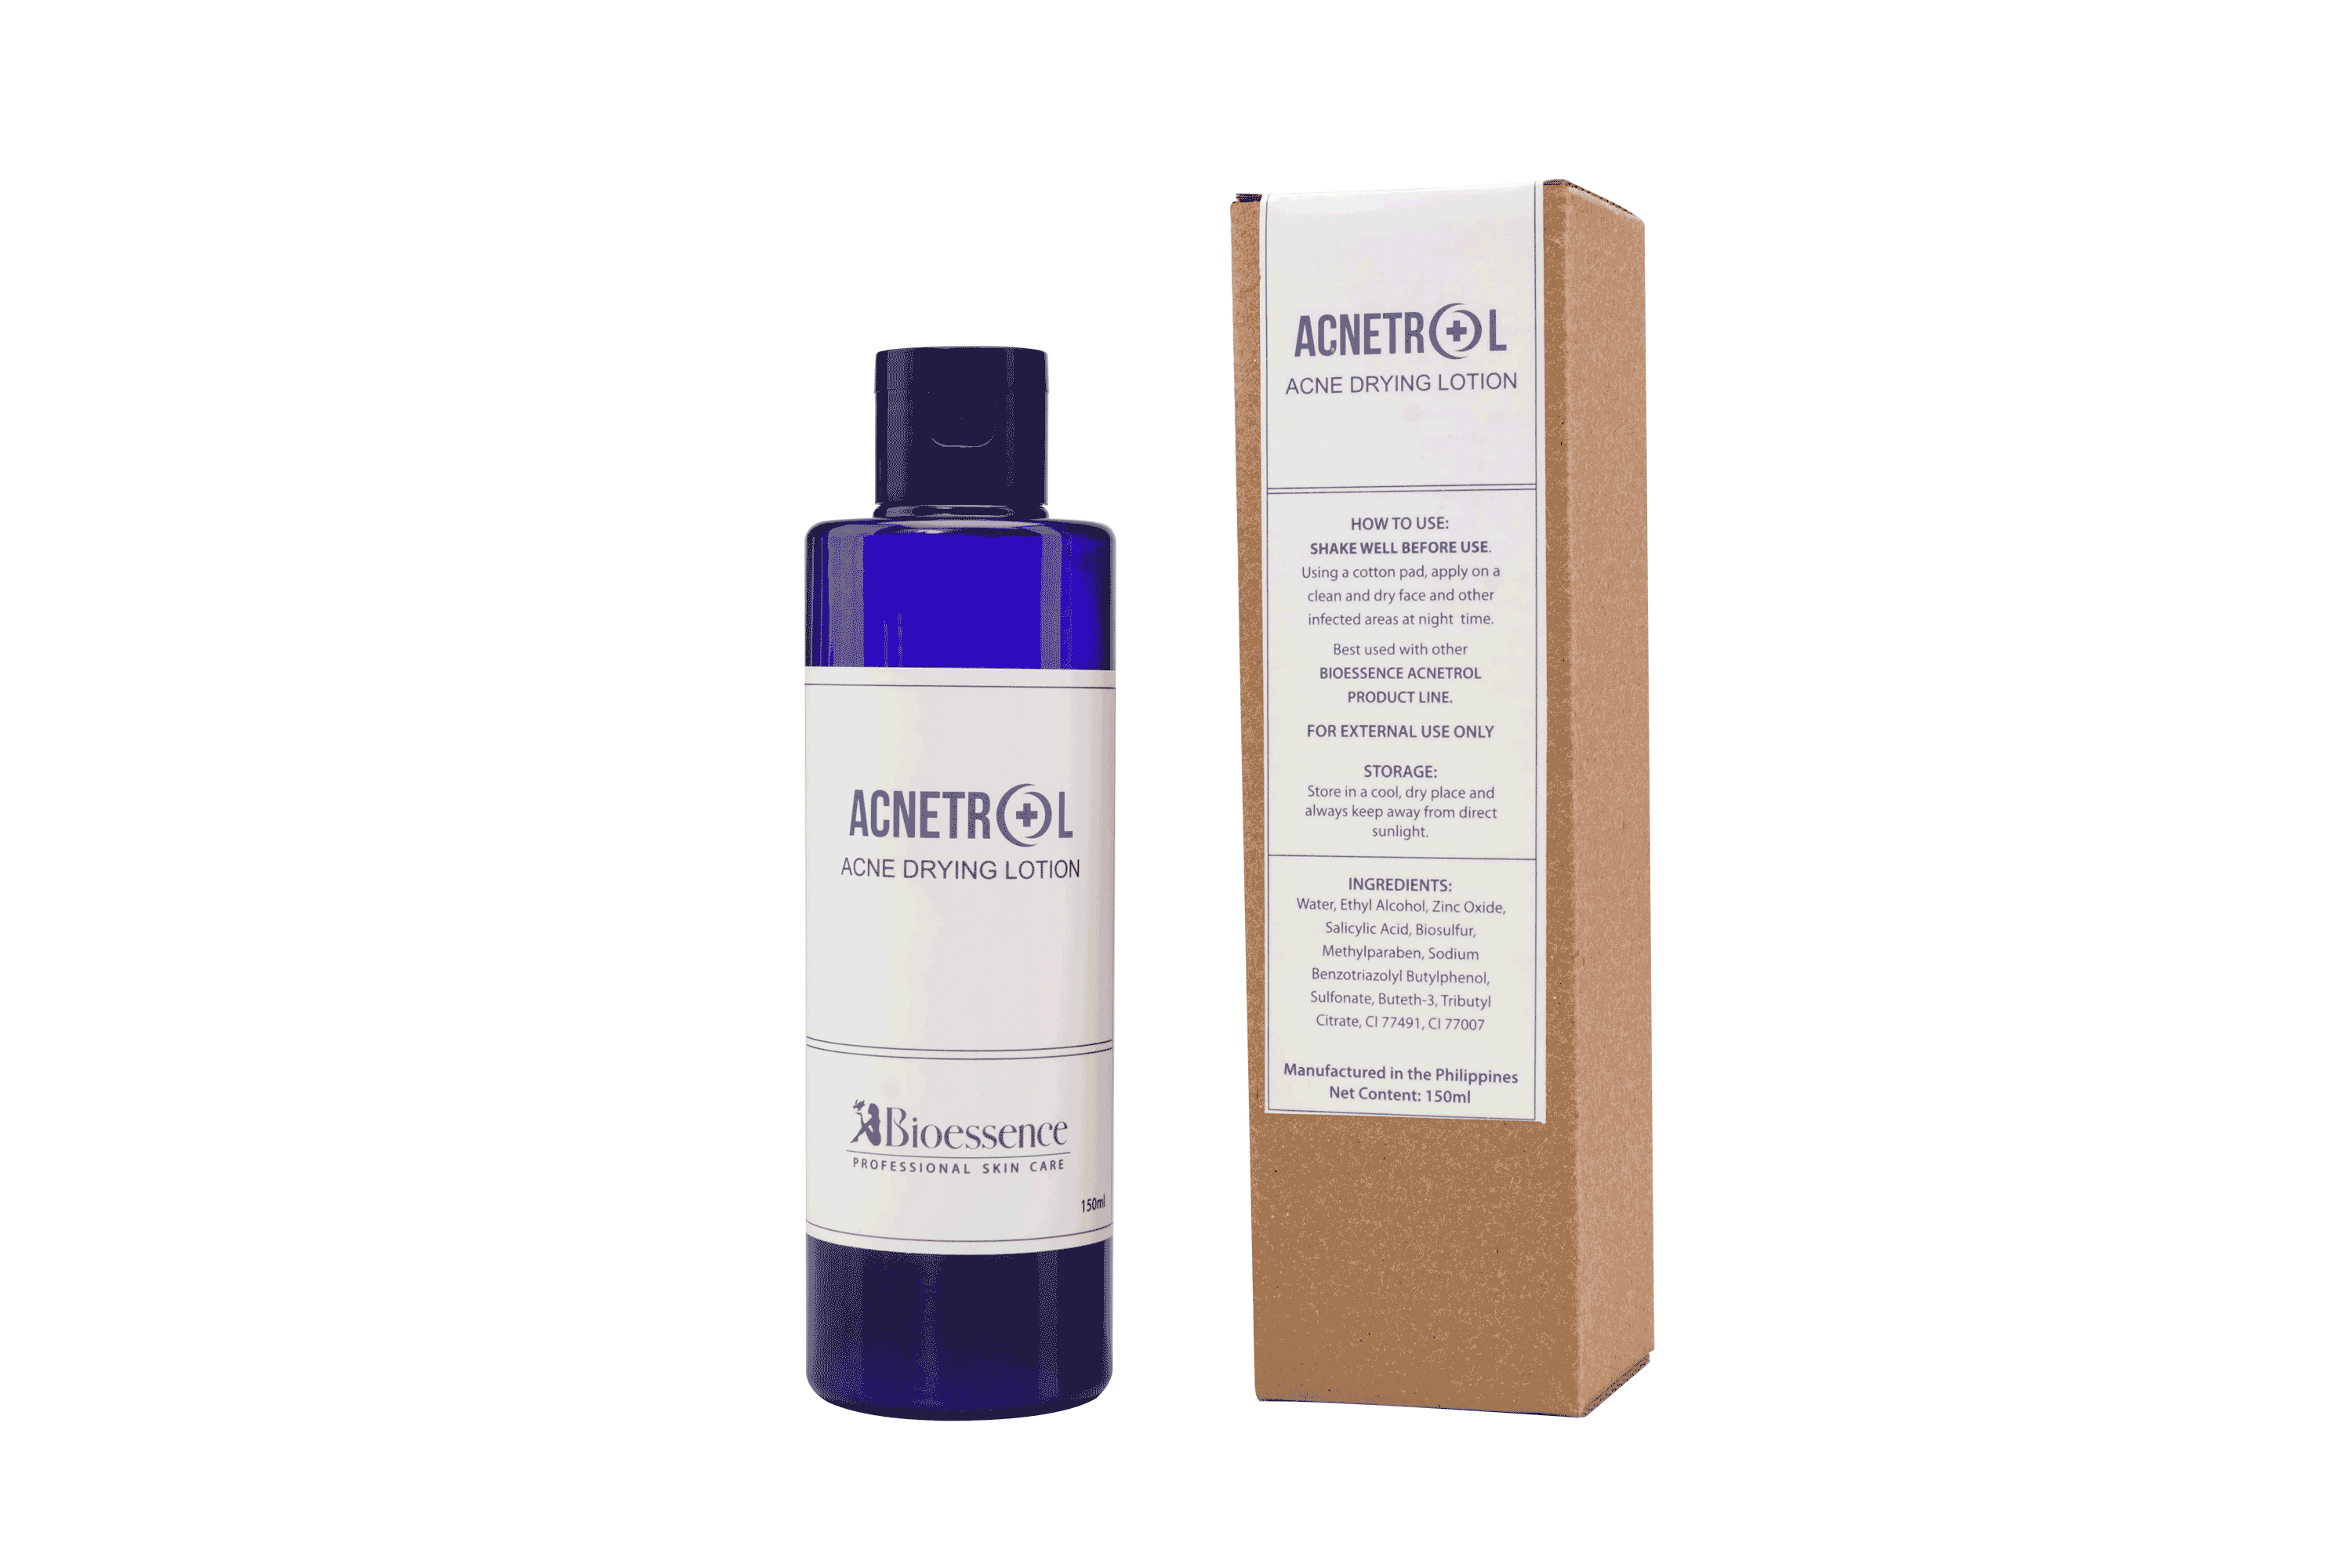 Acnetrol Acne Drying Lotion